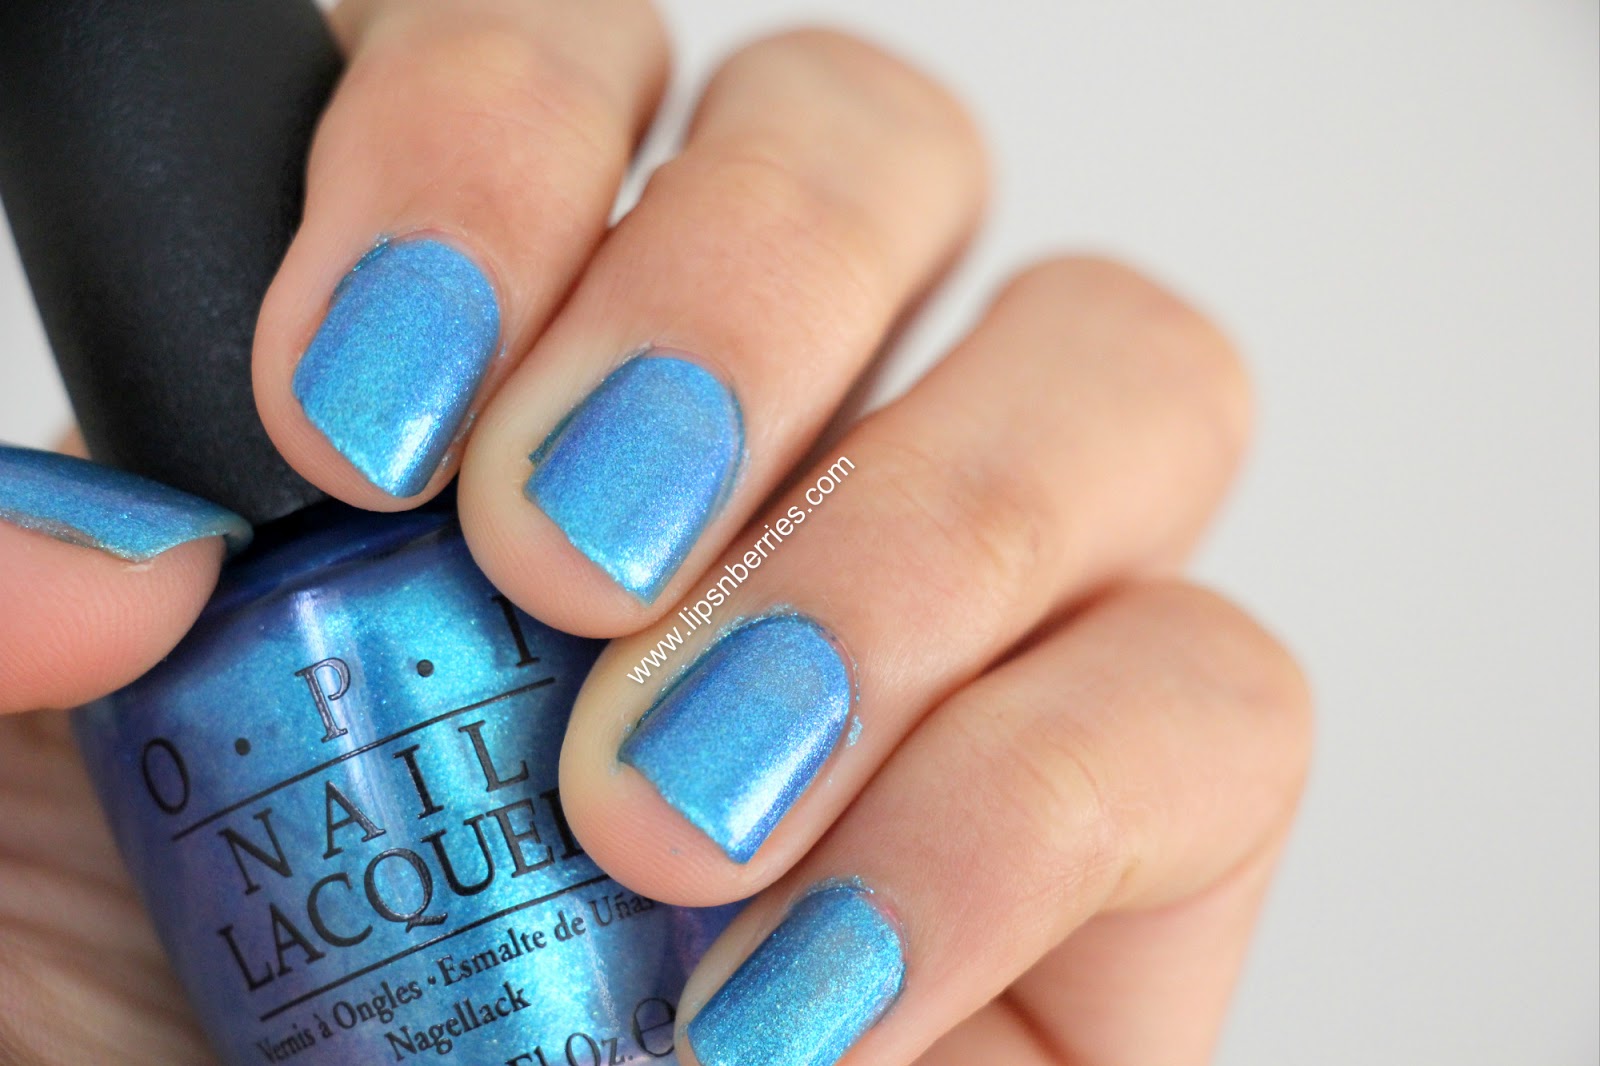 9. OPI GelColor in "I Sea You Wear OPI" - wide 8